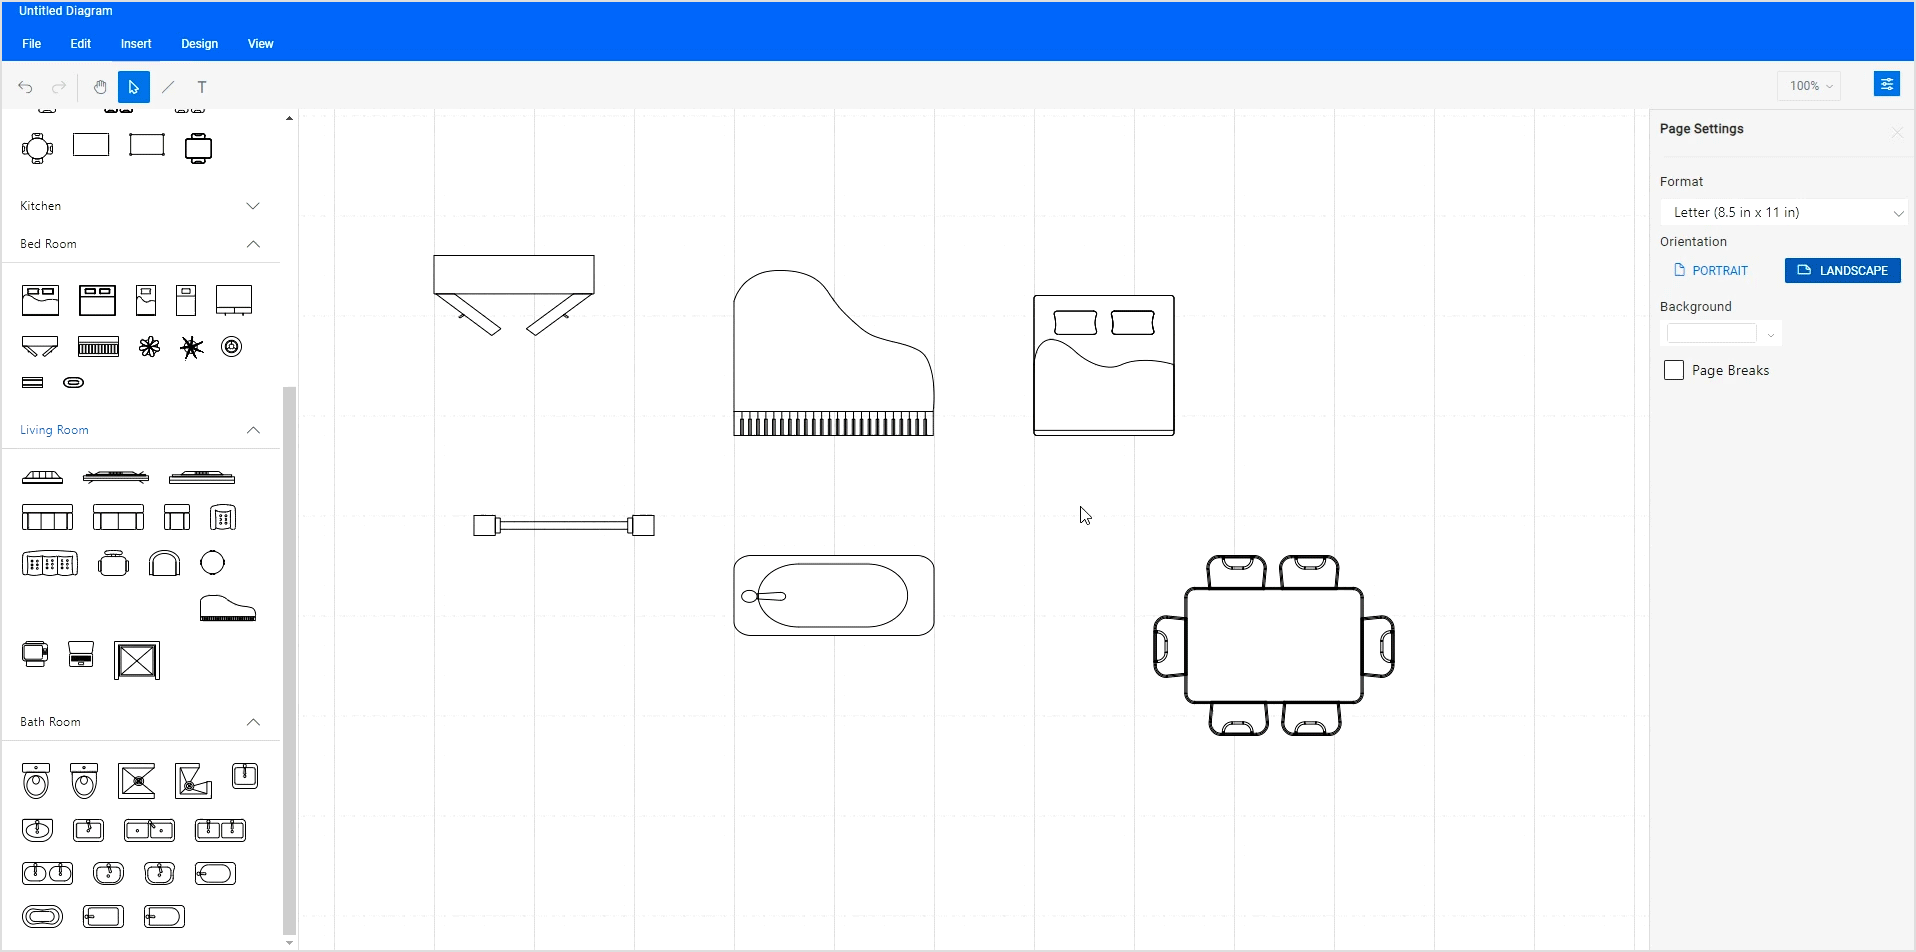 Changing the symbols position in the diagram canvas